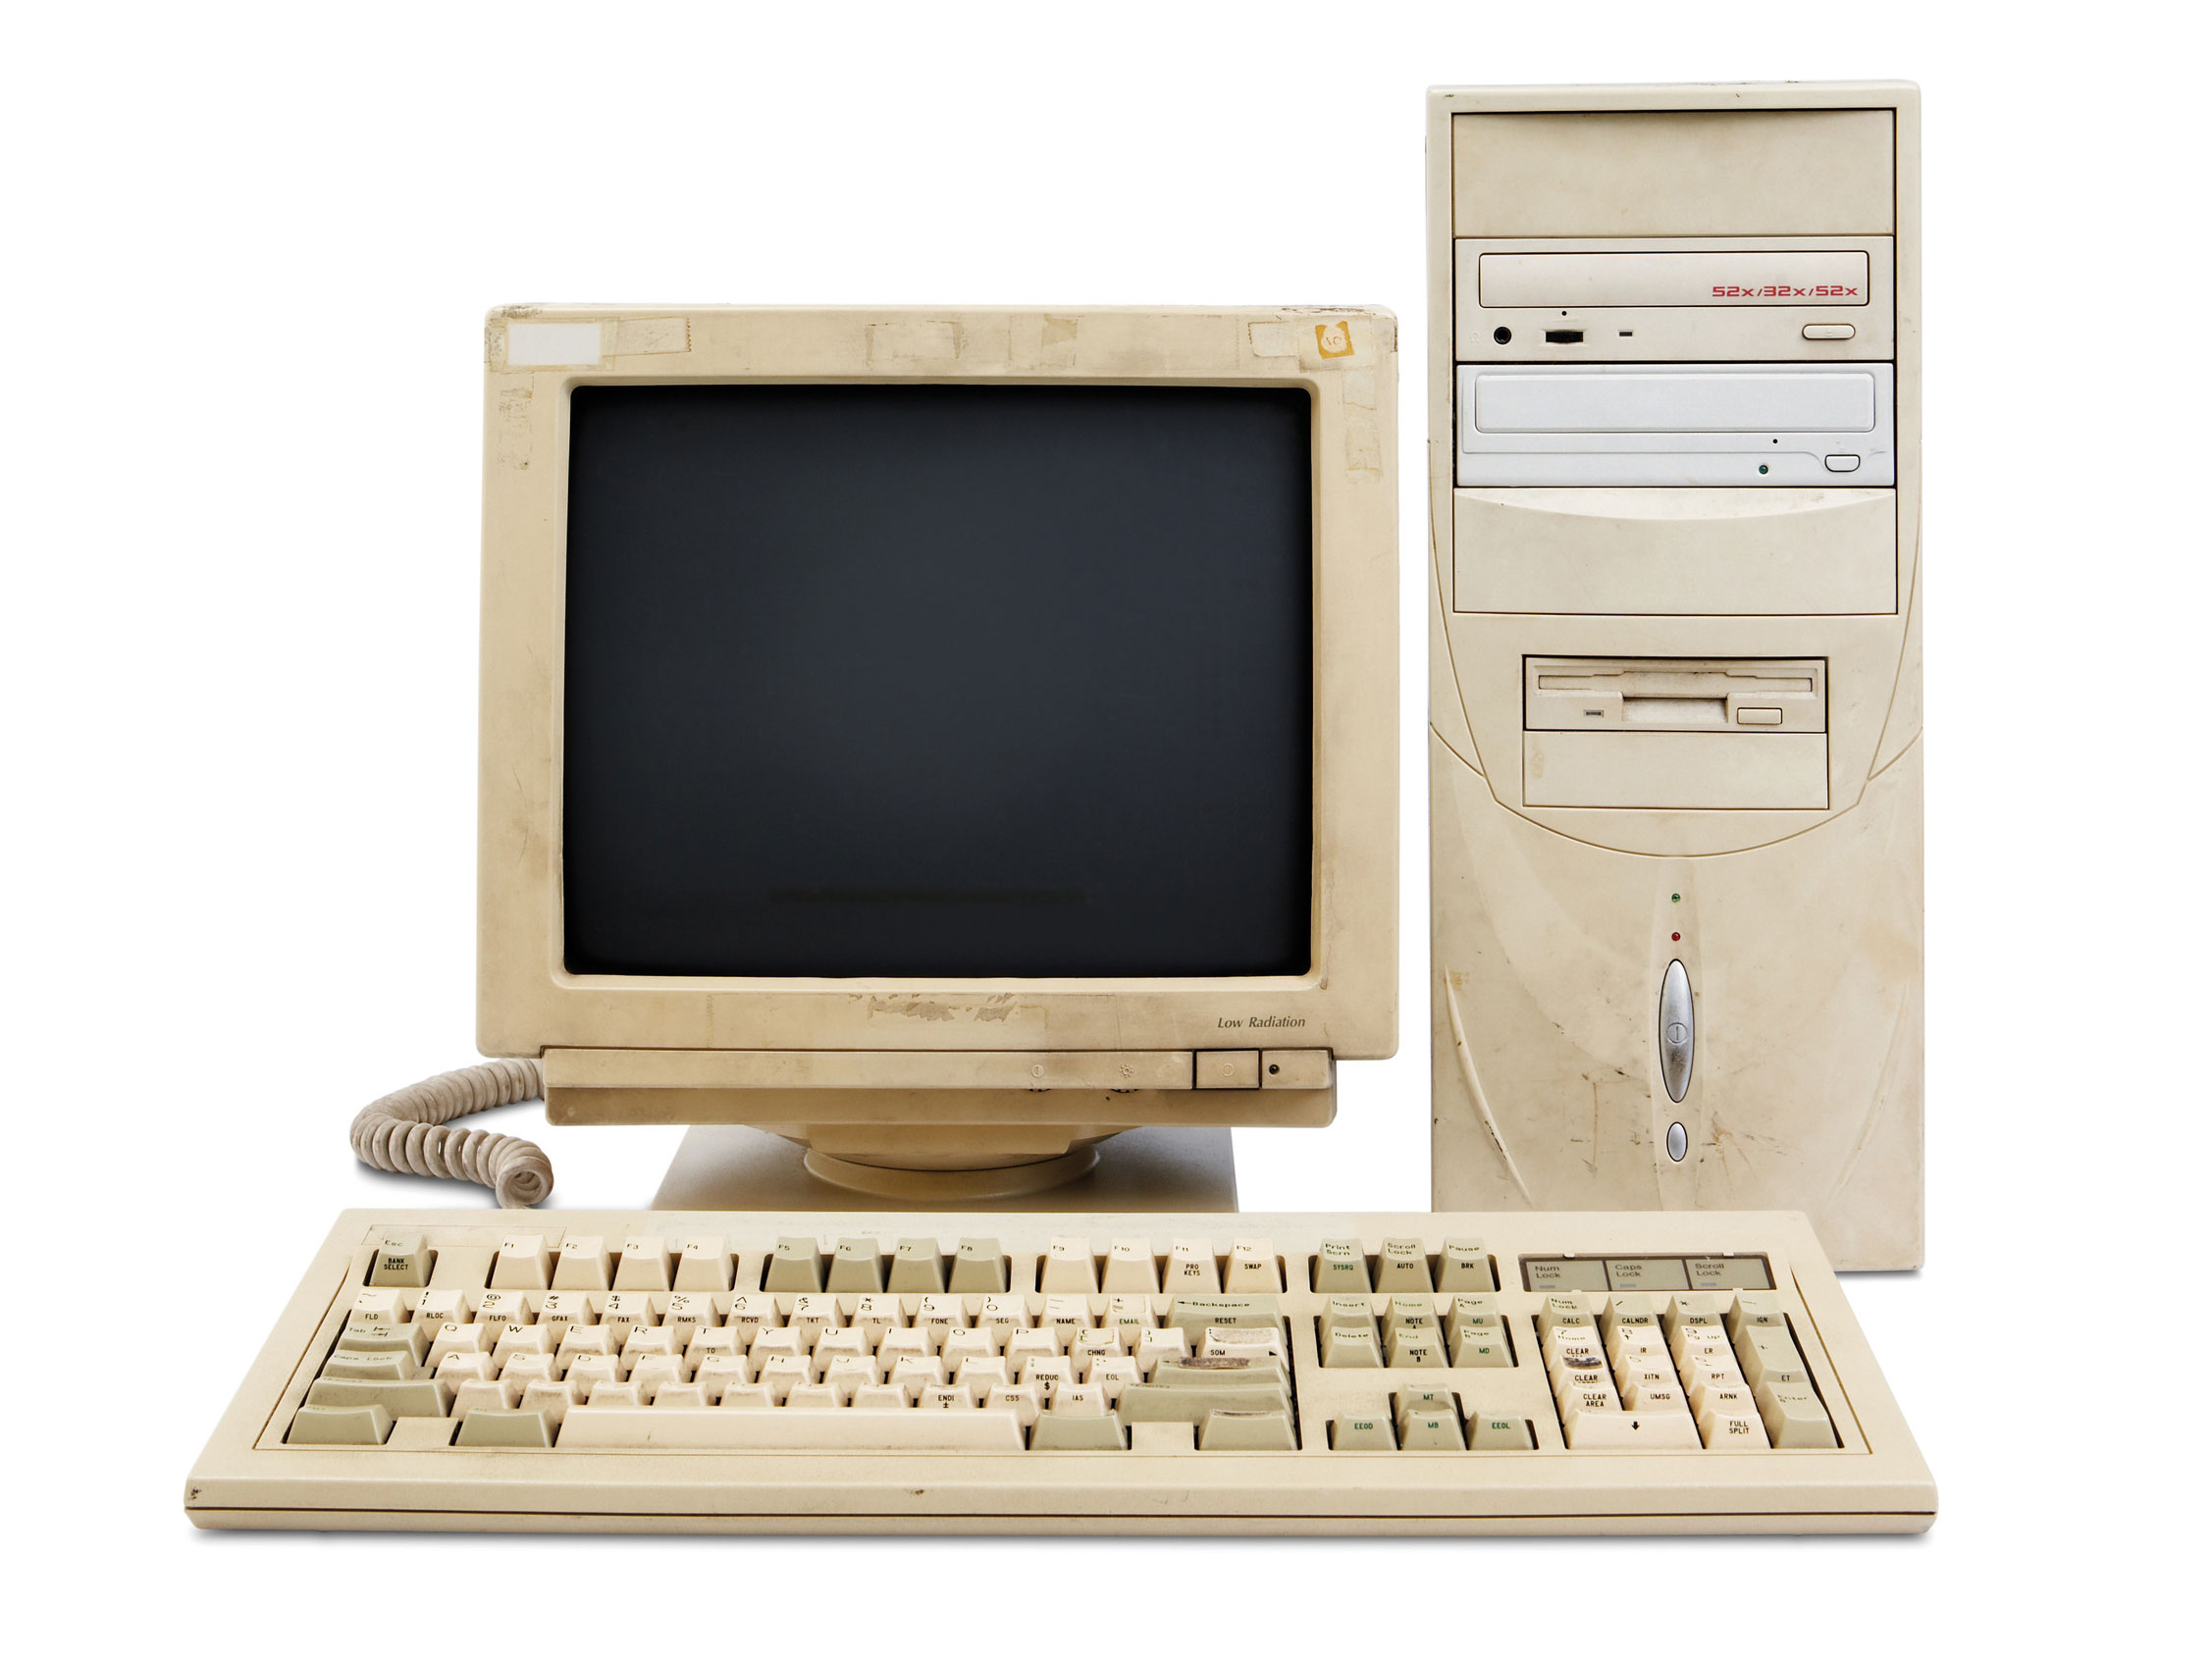 How to Decommission, Reuse, or Sell Your Old PC